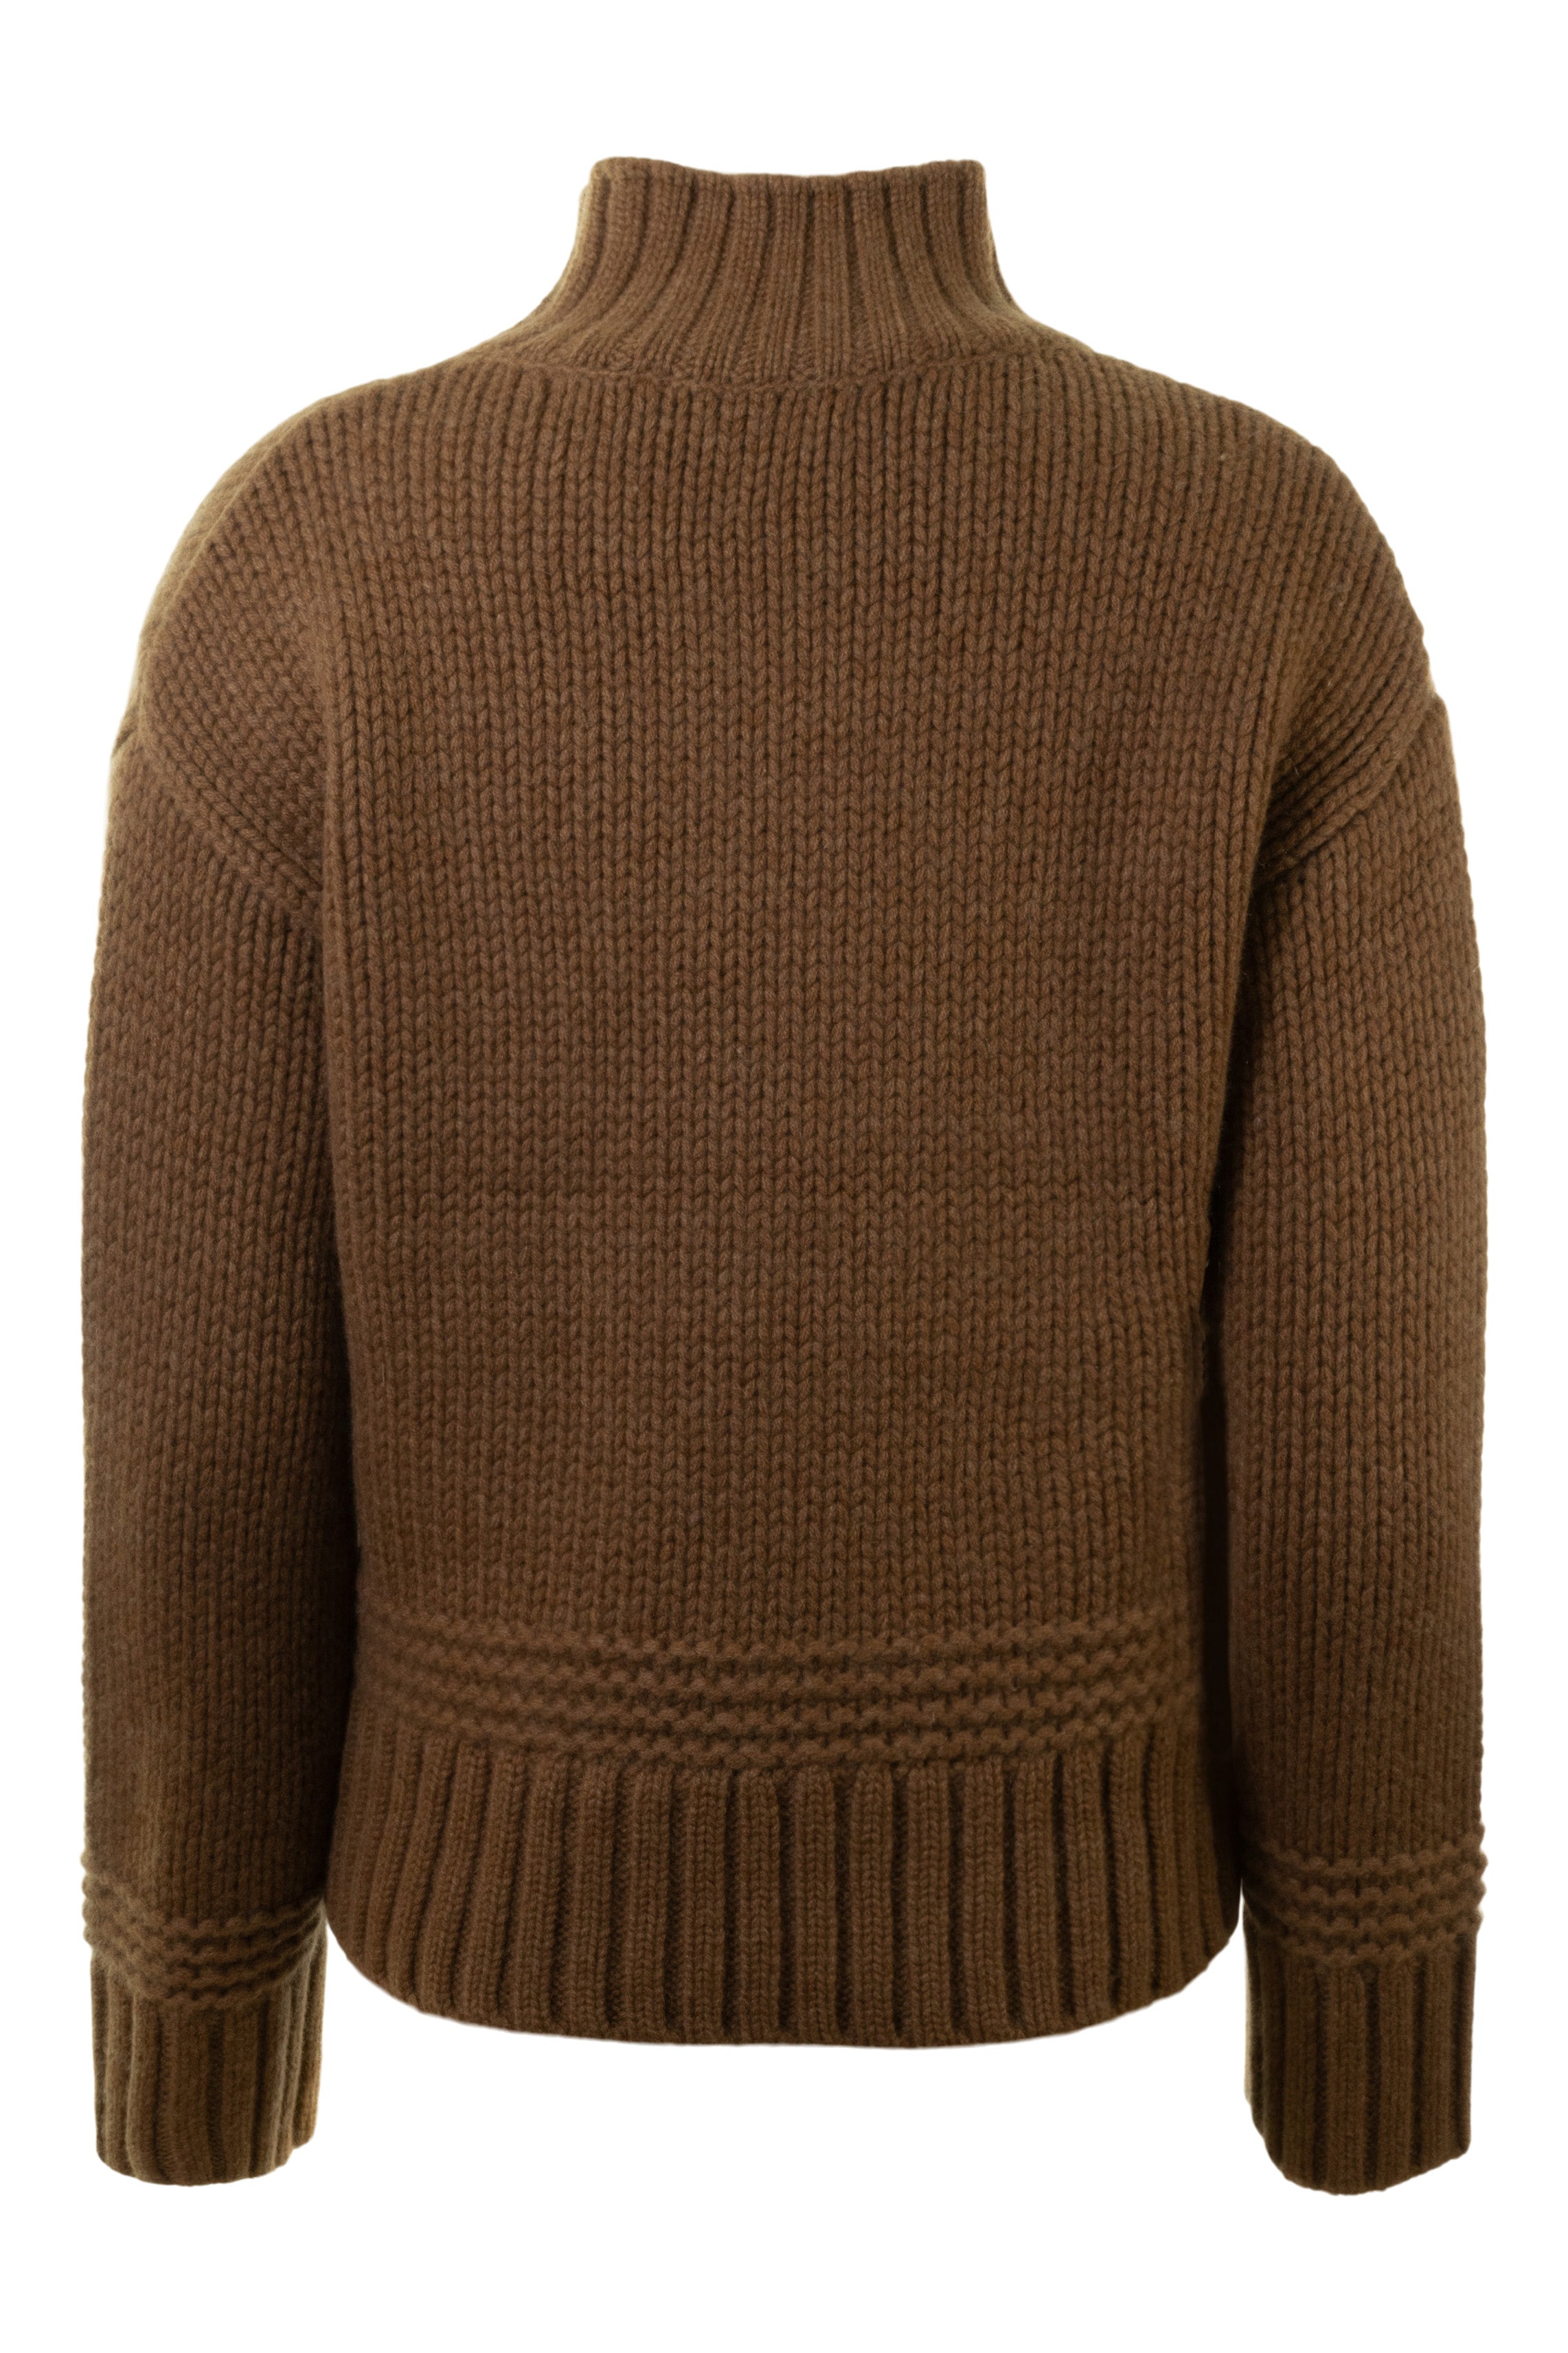 Repeat Cashmere Stand Collar Sweater with Ribbed Hem in Hazel